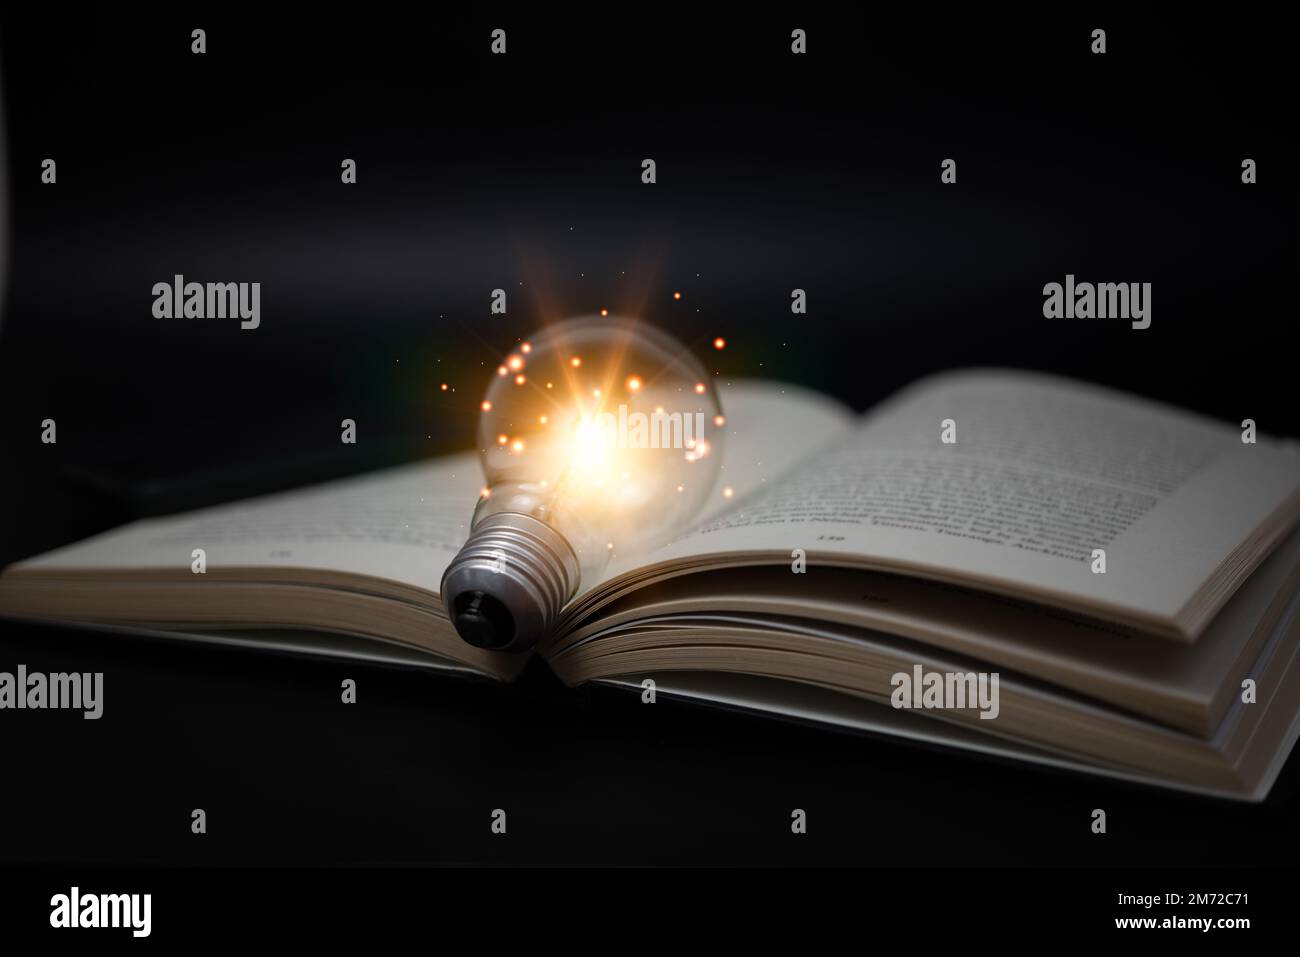 Education knowledge and business studying success idea or solution concept, Bright lamp or glowing light bulb and book on table background. Stock Photo